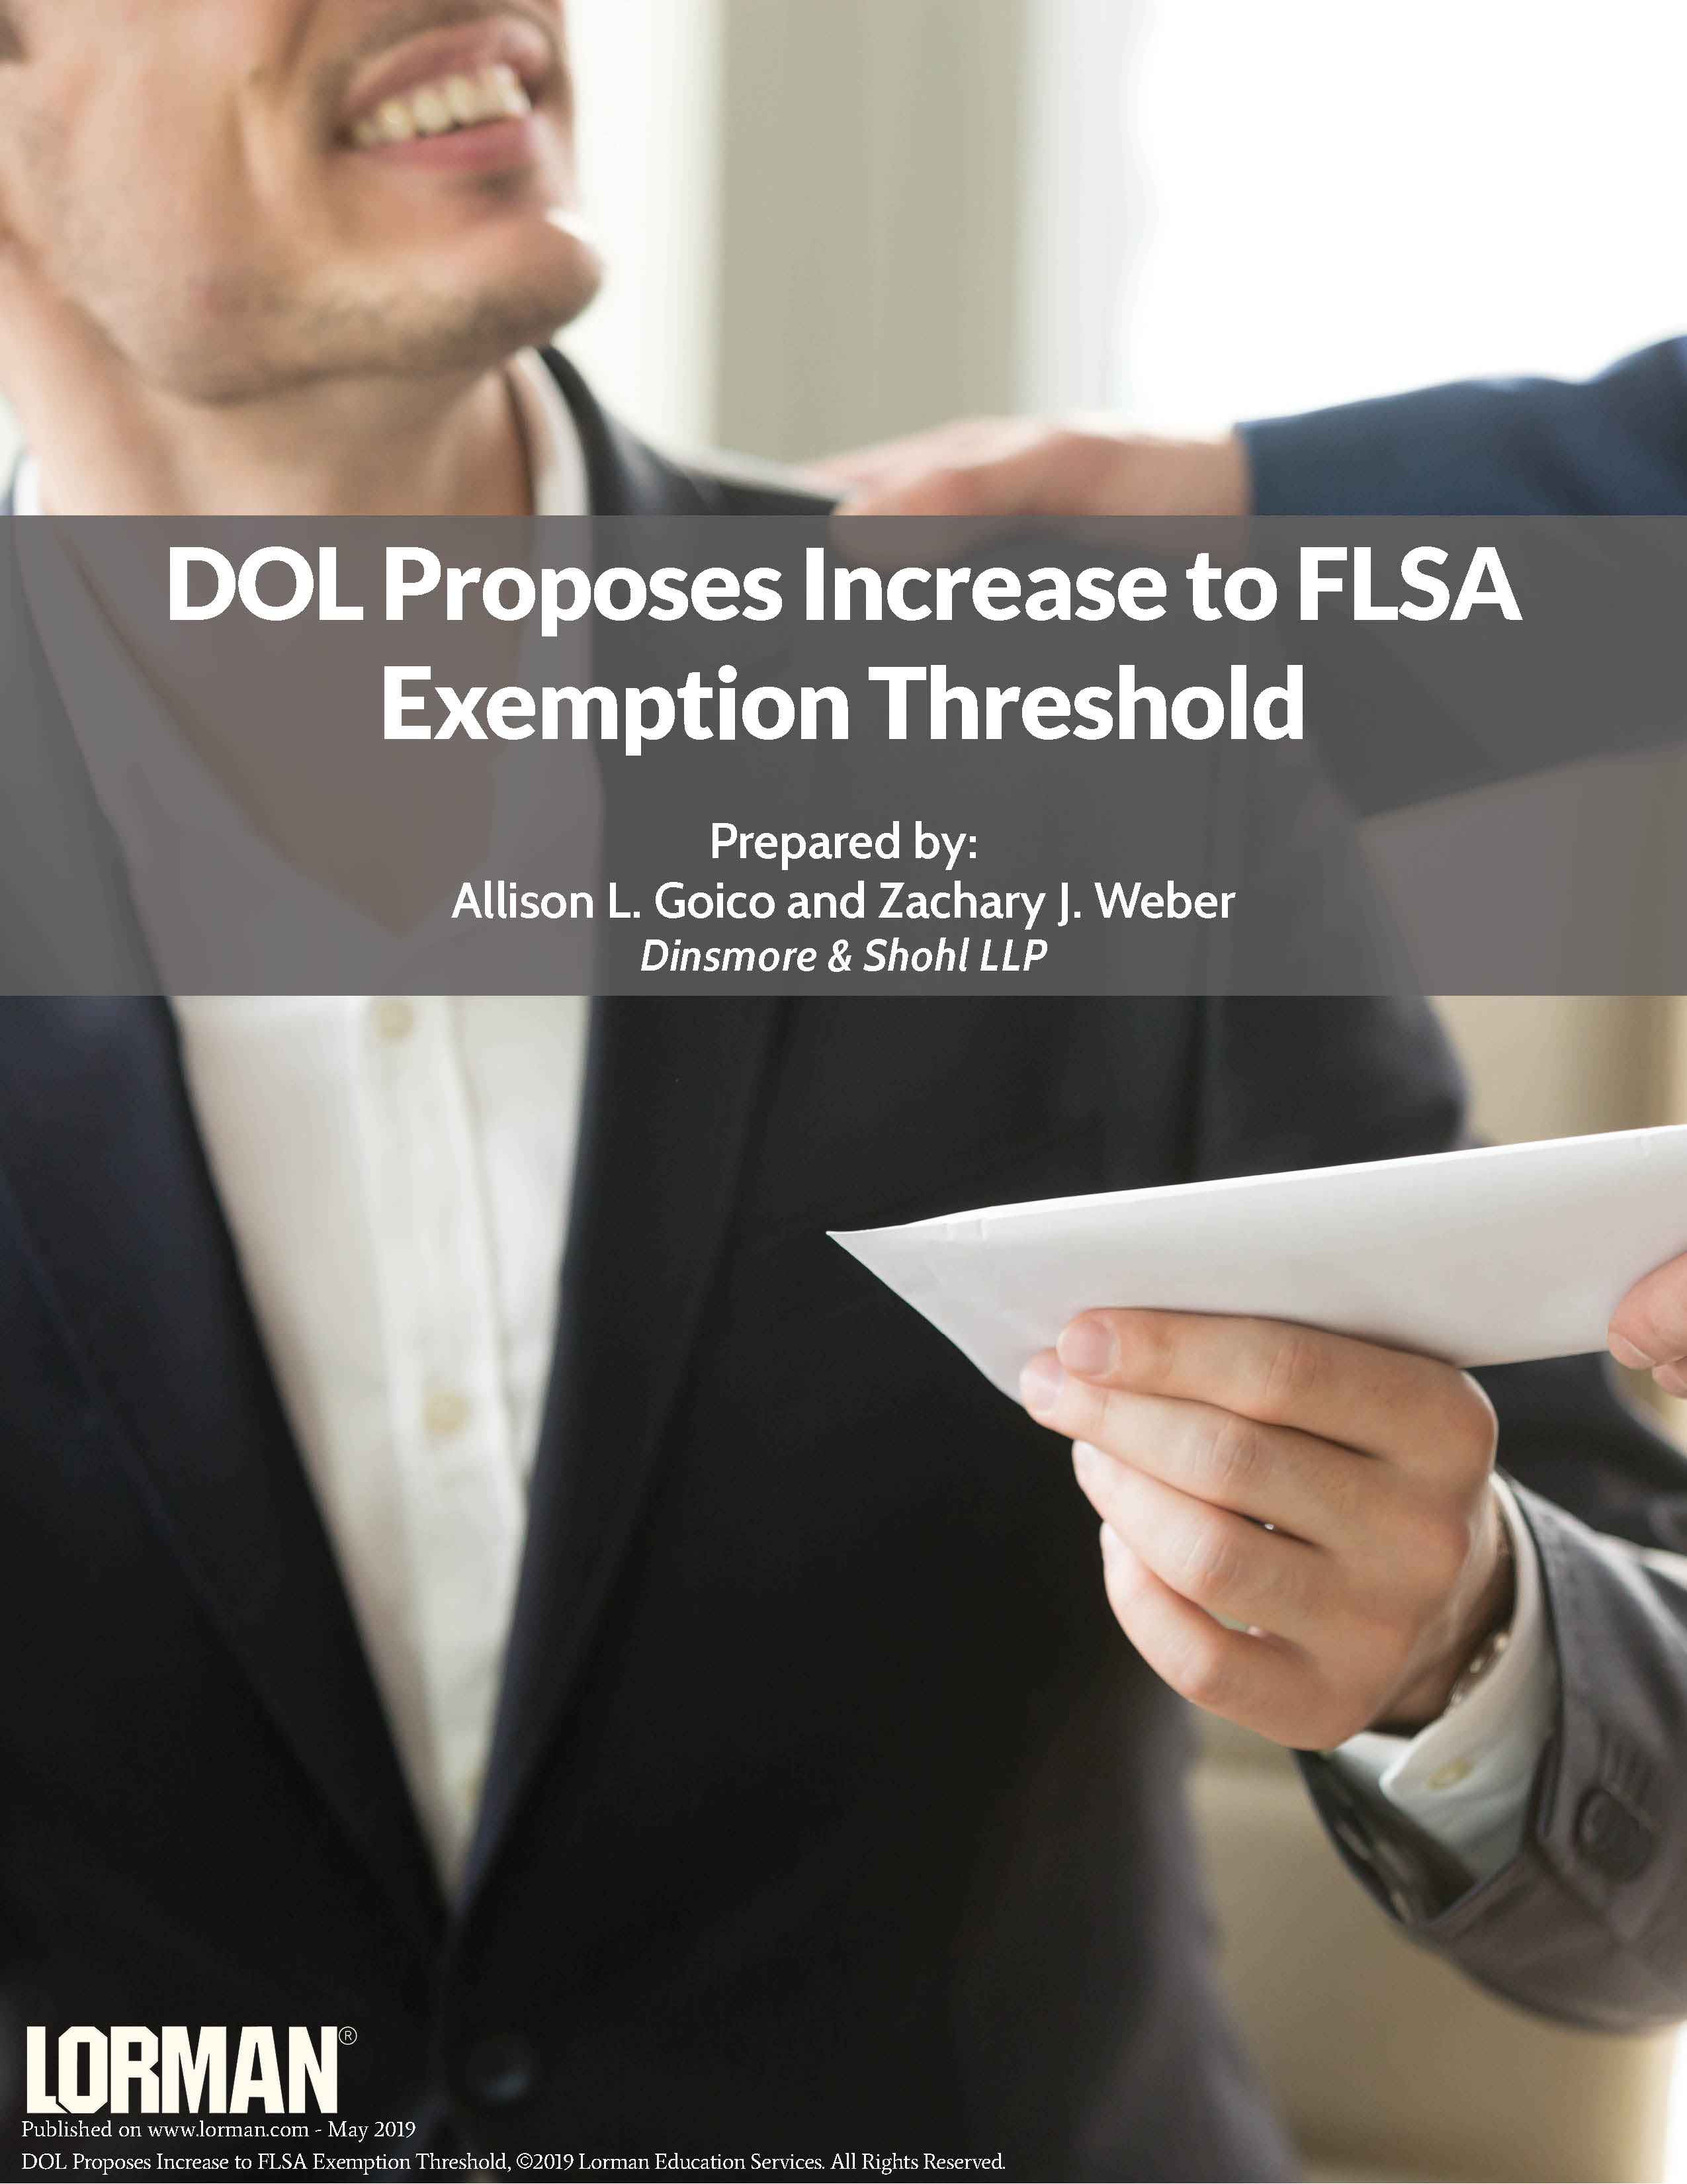 DOL Proposes Increase to FLSA Exemption Threshold